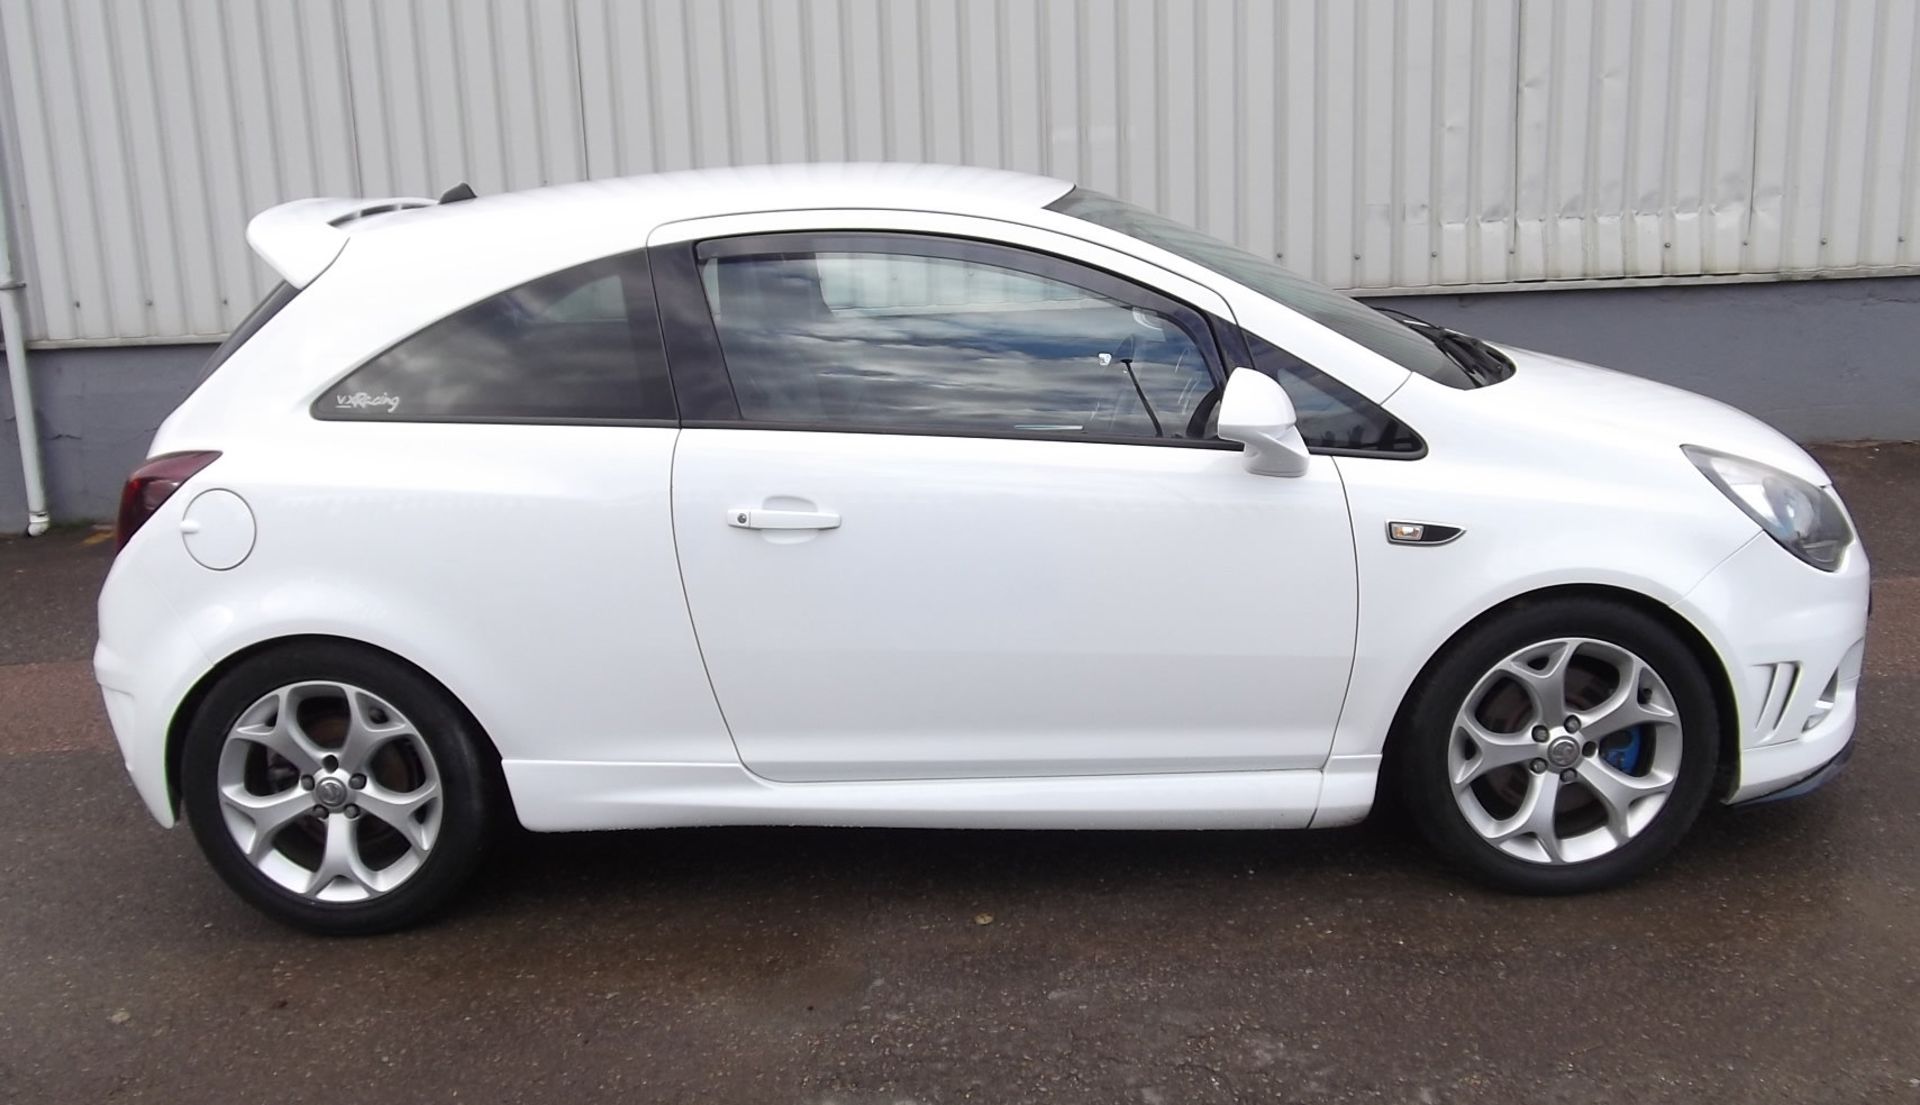 2012 Vauxhall Corsa 1.6T VXR 3 Door Hatchback - CL505 - NO VAT ON THE HAMMER - Location: Corby, - Image 15 of 24